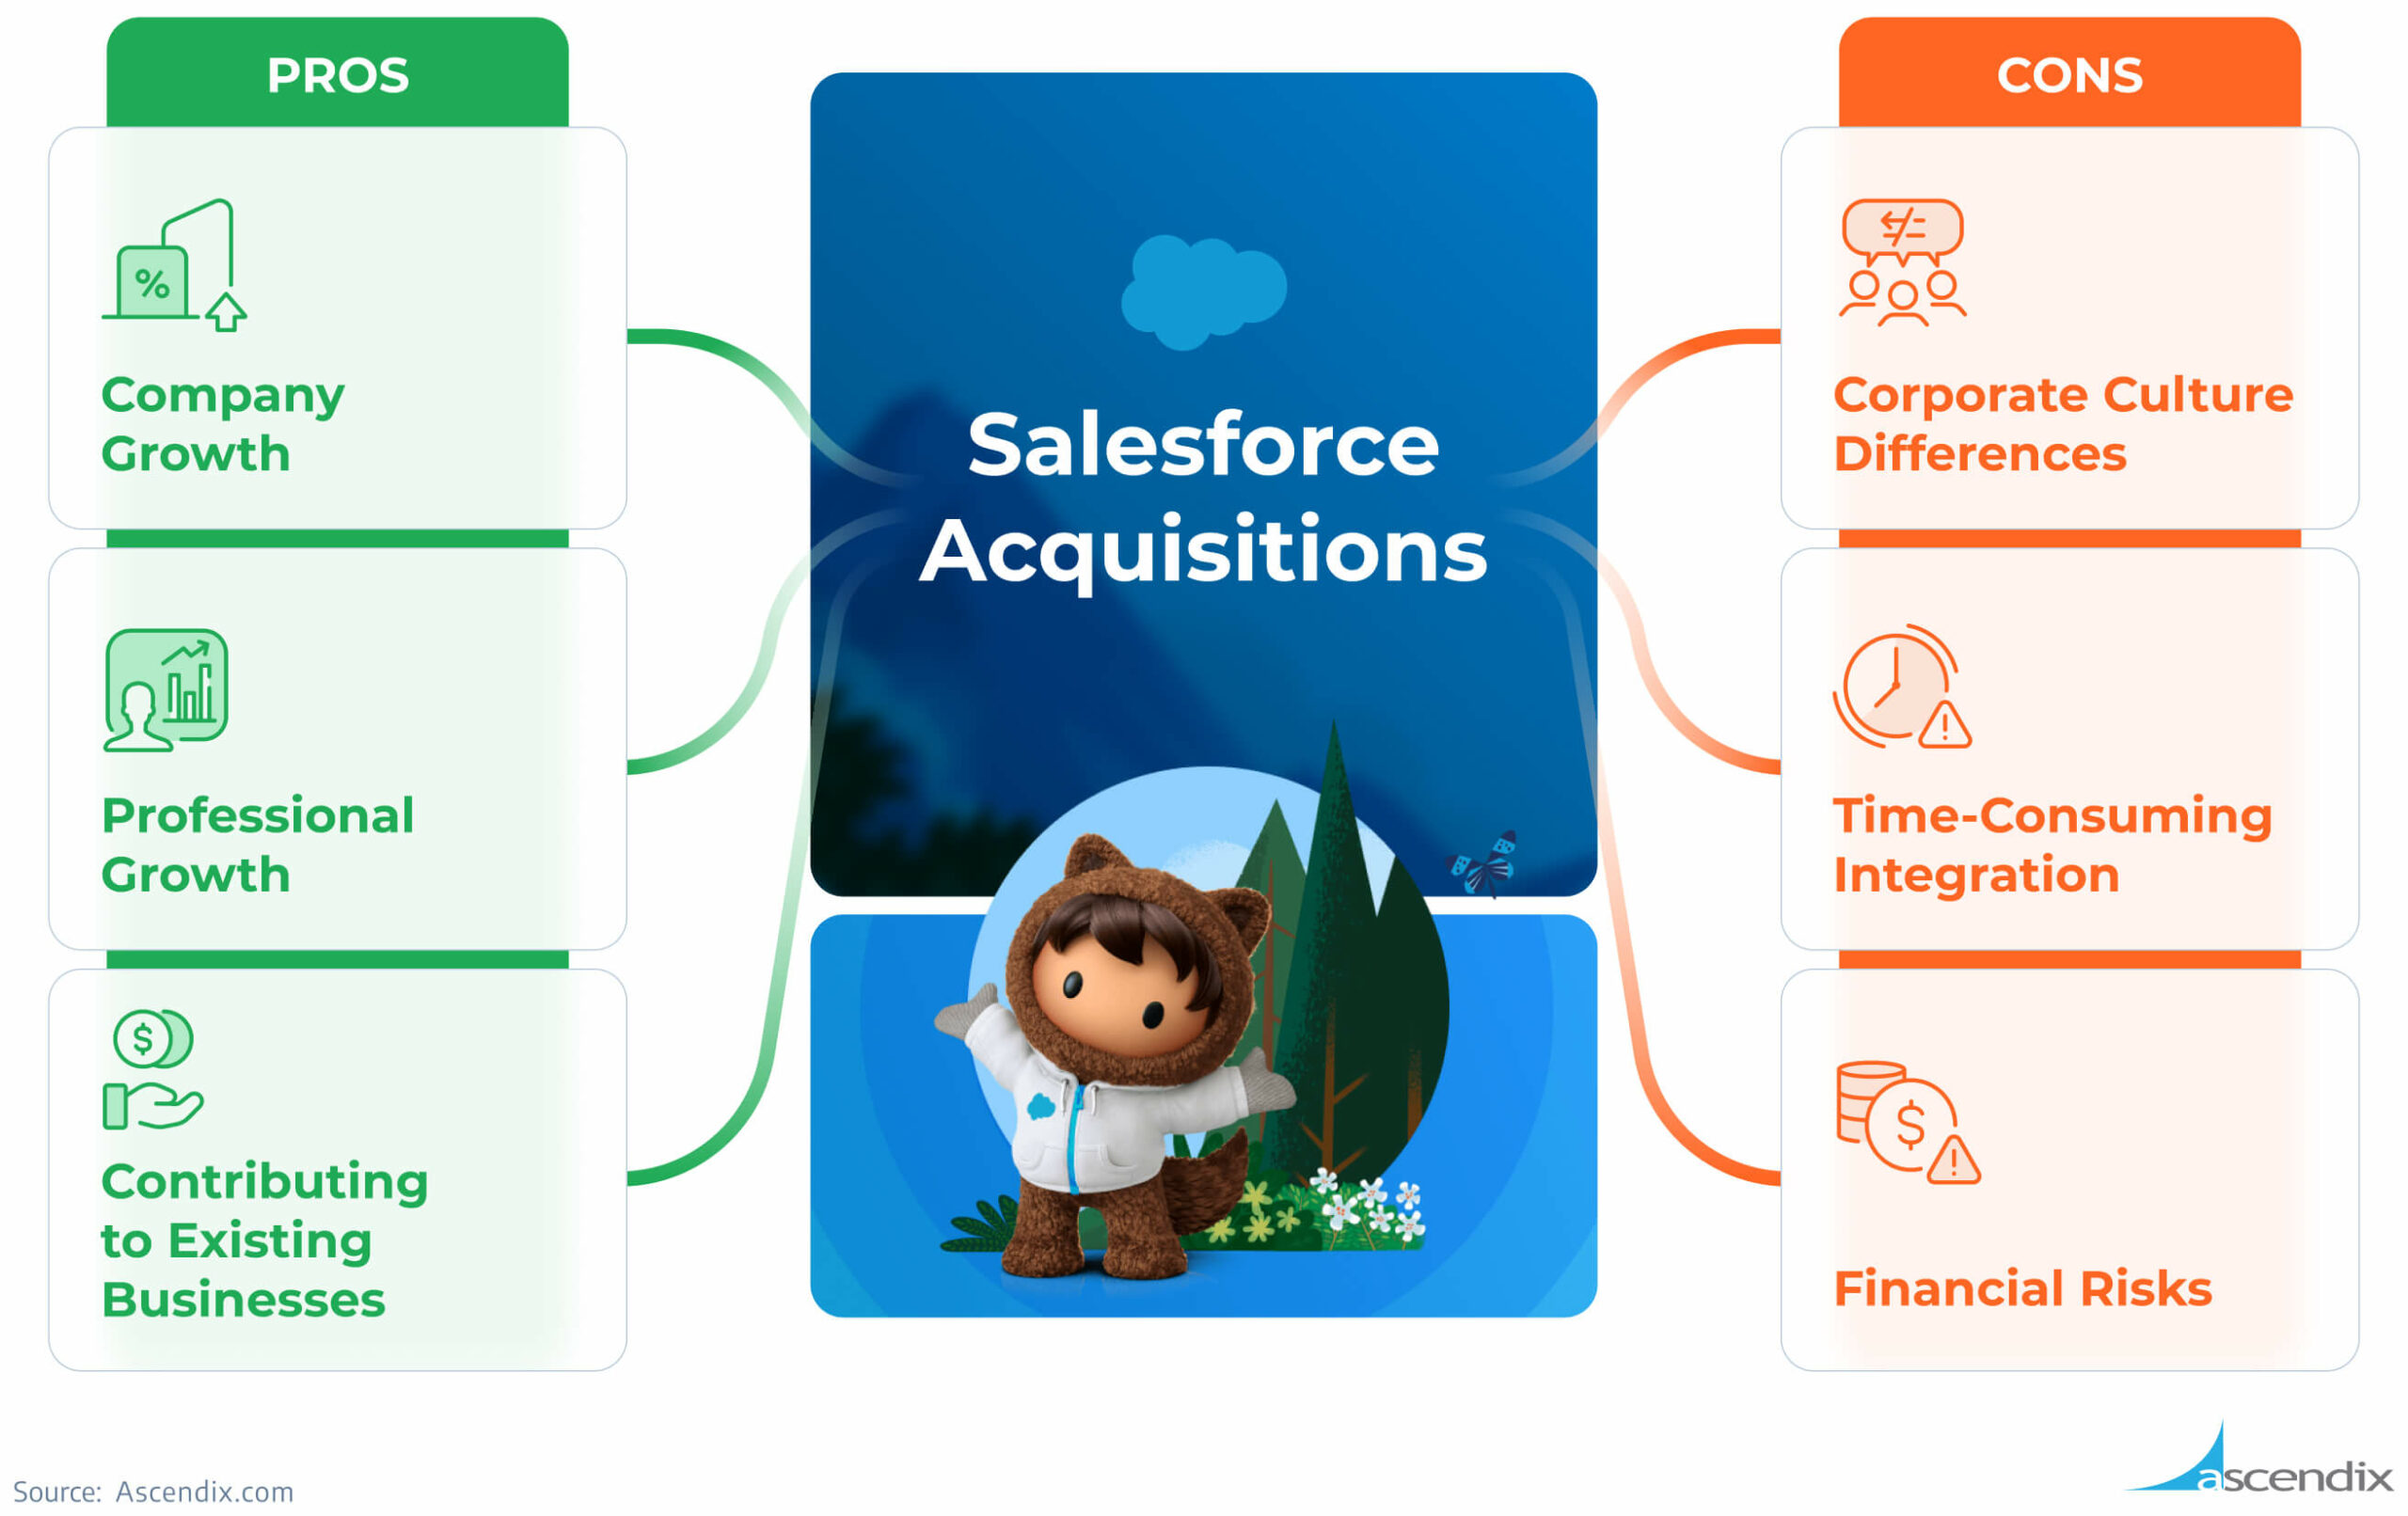 Salesforce Acquisitions: Pros and Cons